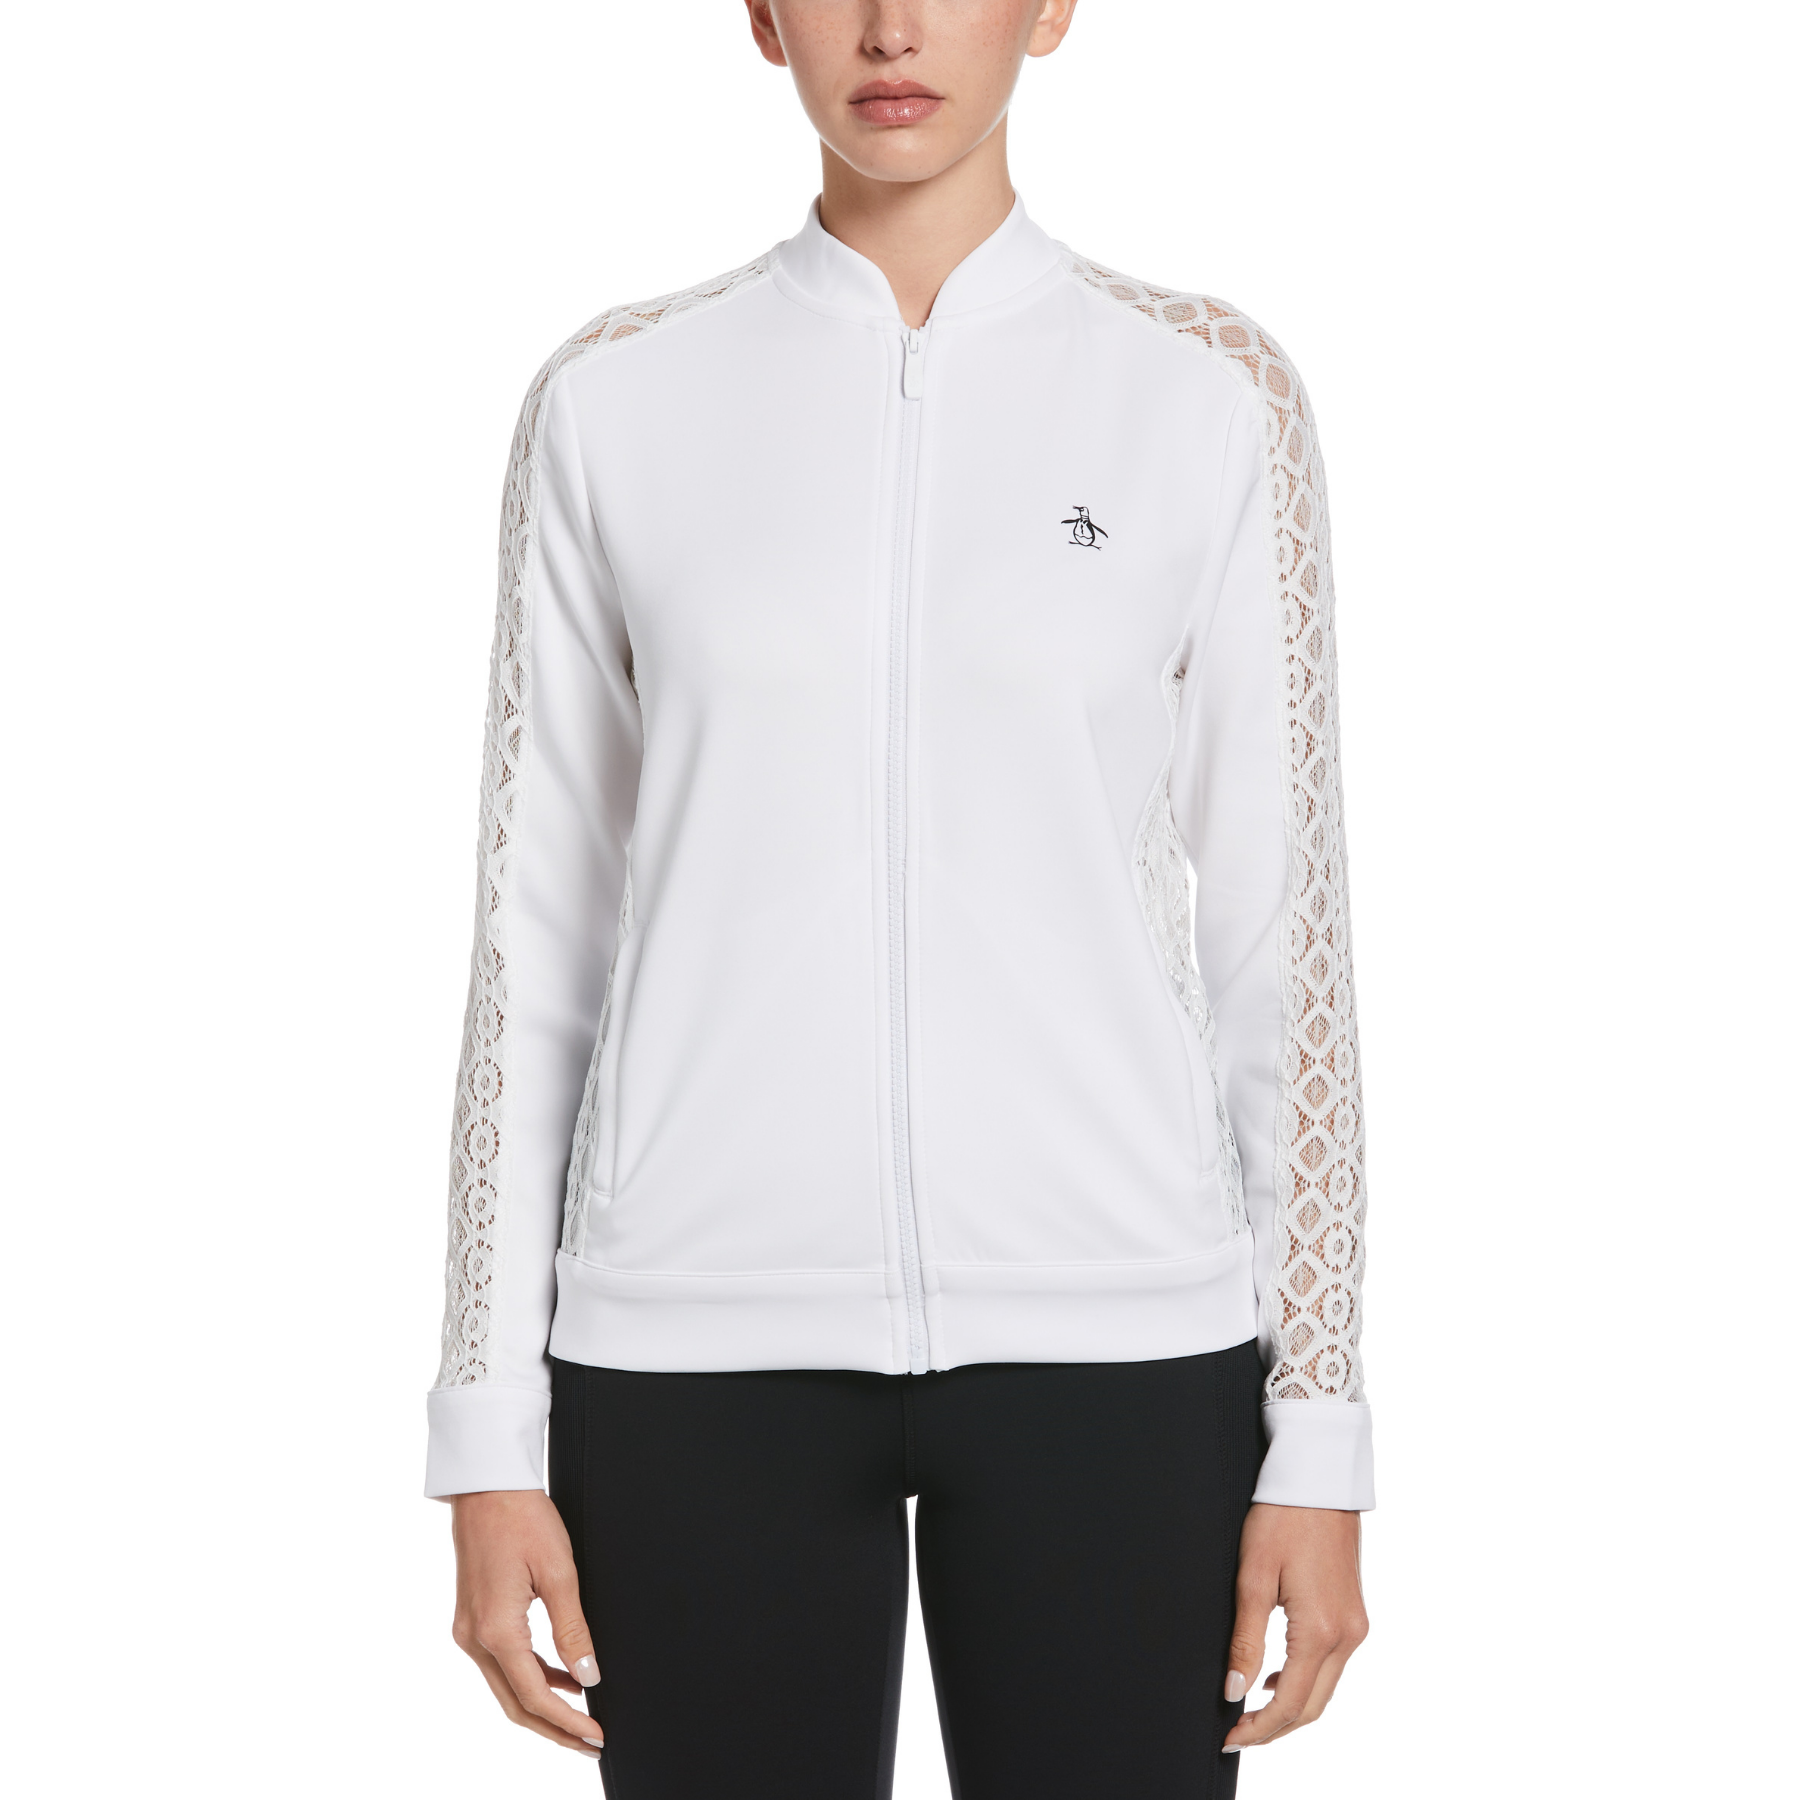 View Womens Knit Tennis Sweater In Bright White information